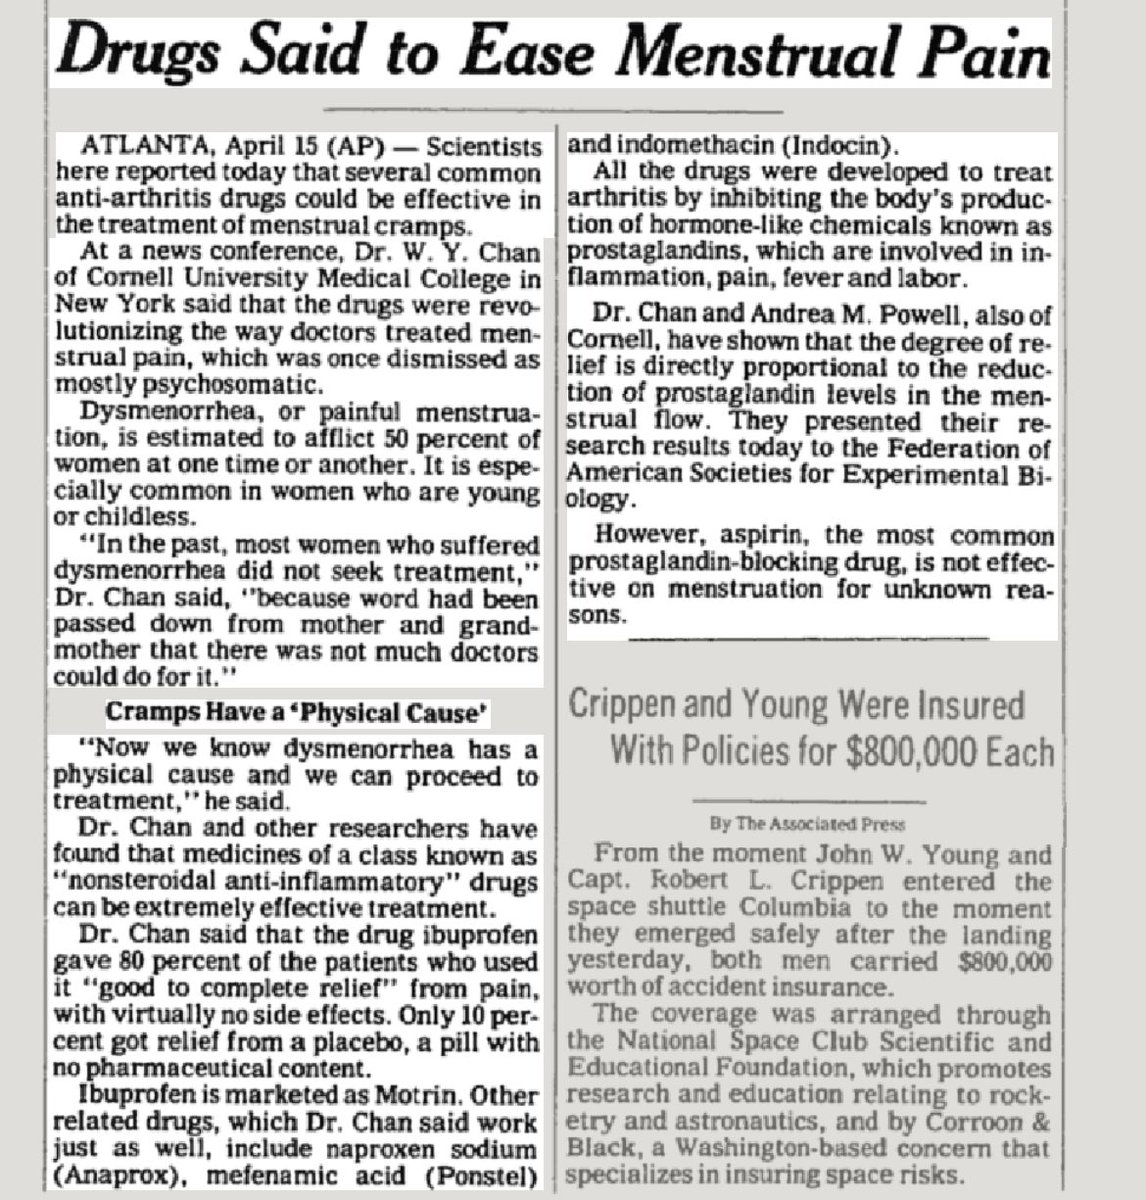 I was today year's old when I learned they used to think menstrual pain was psychosomatic & the doctor who thought to try ibuprofen was considered a revolutionary